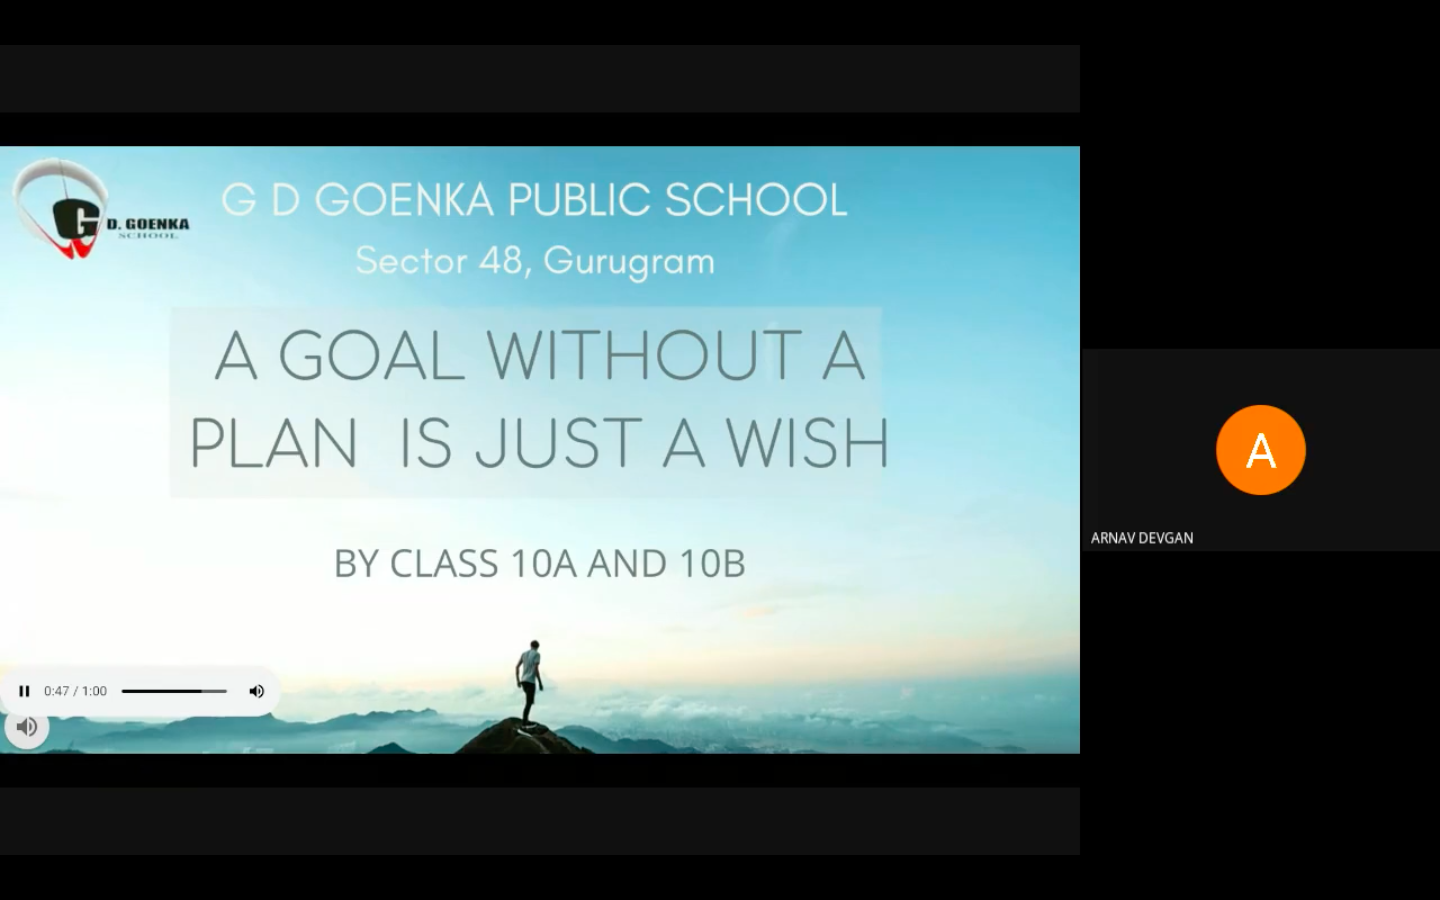 ASSEMBLY- A GOAL WITHOUT A PLAN IS JUST A WISH